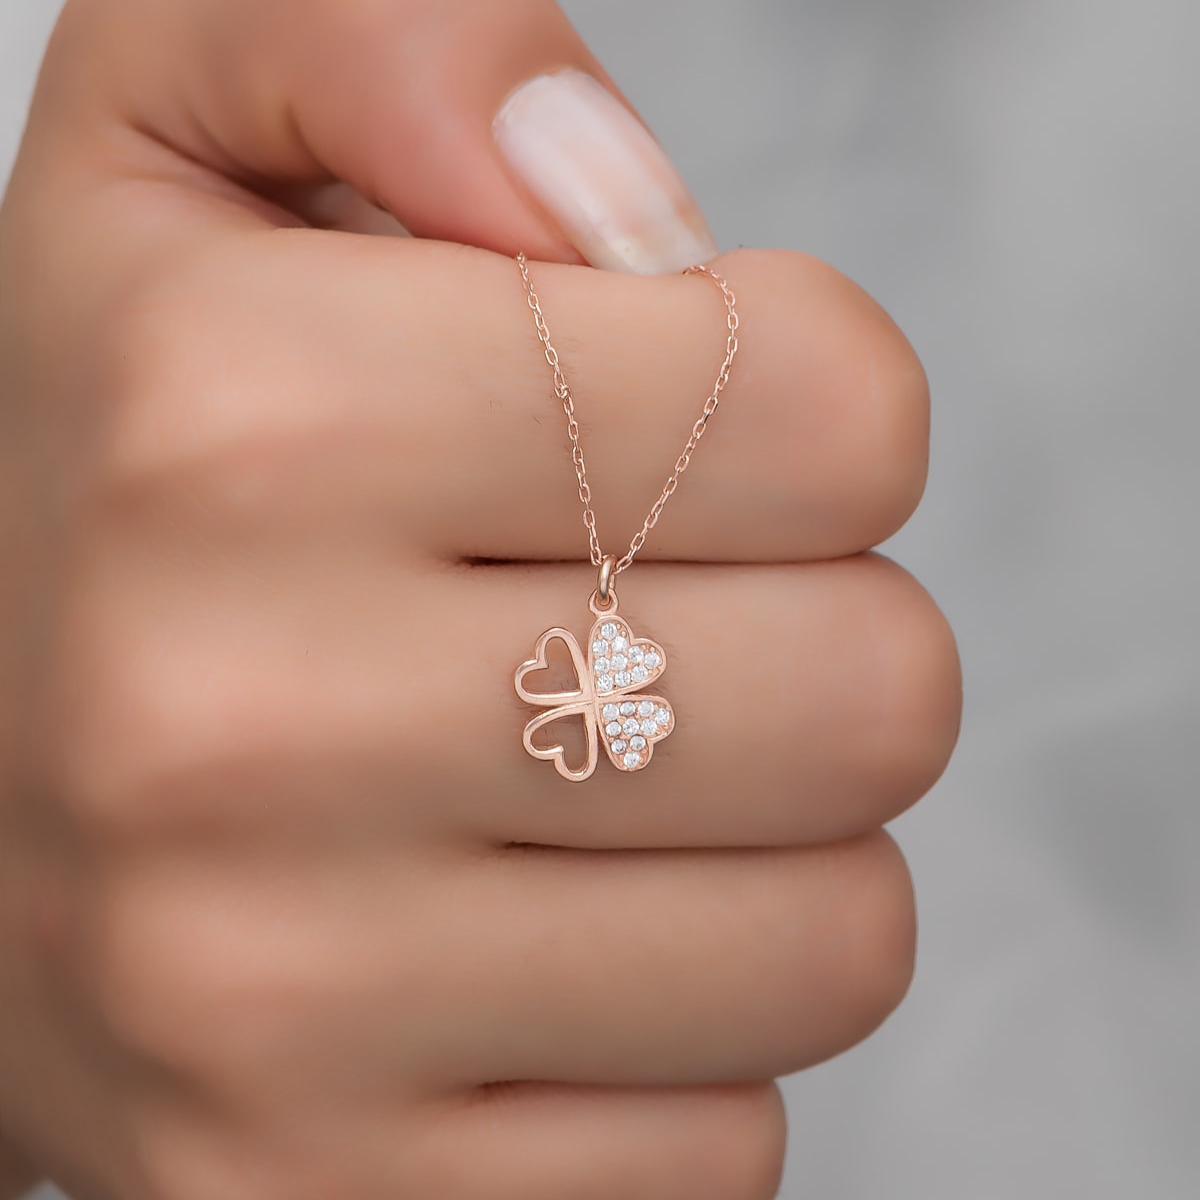 Clover Heart Necklace • Four Leaf Clover Necklace • Gift For Mom - Trending Silver Gifts